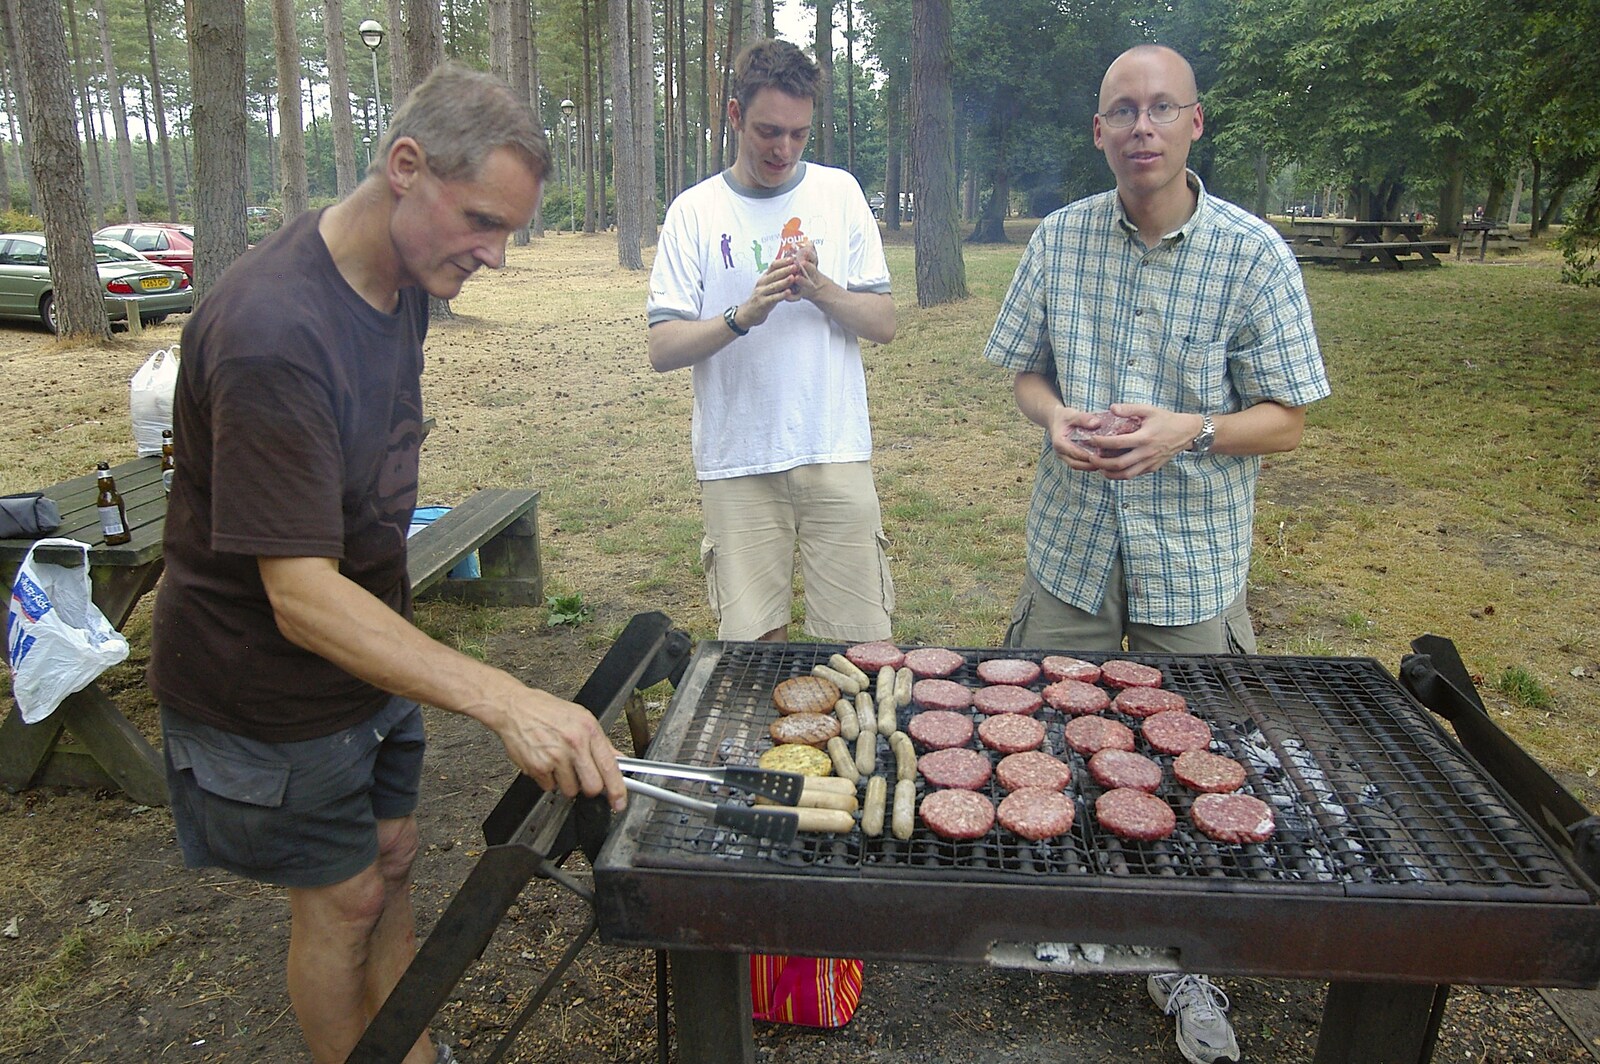 Tim Simpson pokes a sausage from Qualcomm Cambridge "Go Ape", High Lodge, Thetford Forest - 27th July 2006